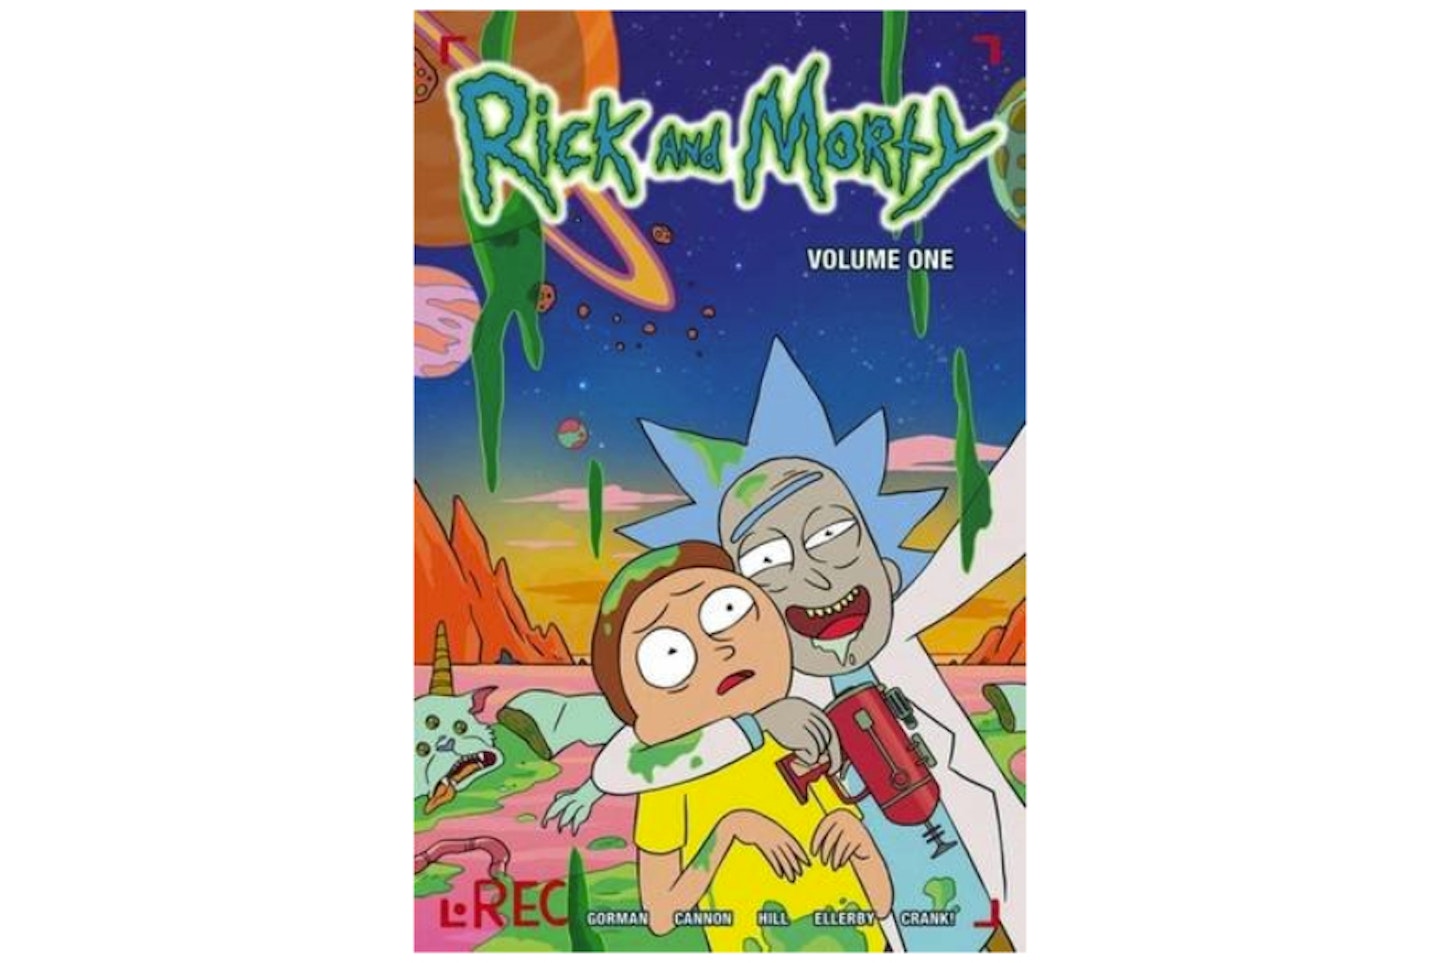 Rick and Morty Volume One, £10.49